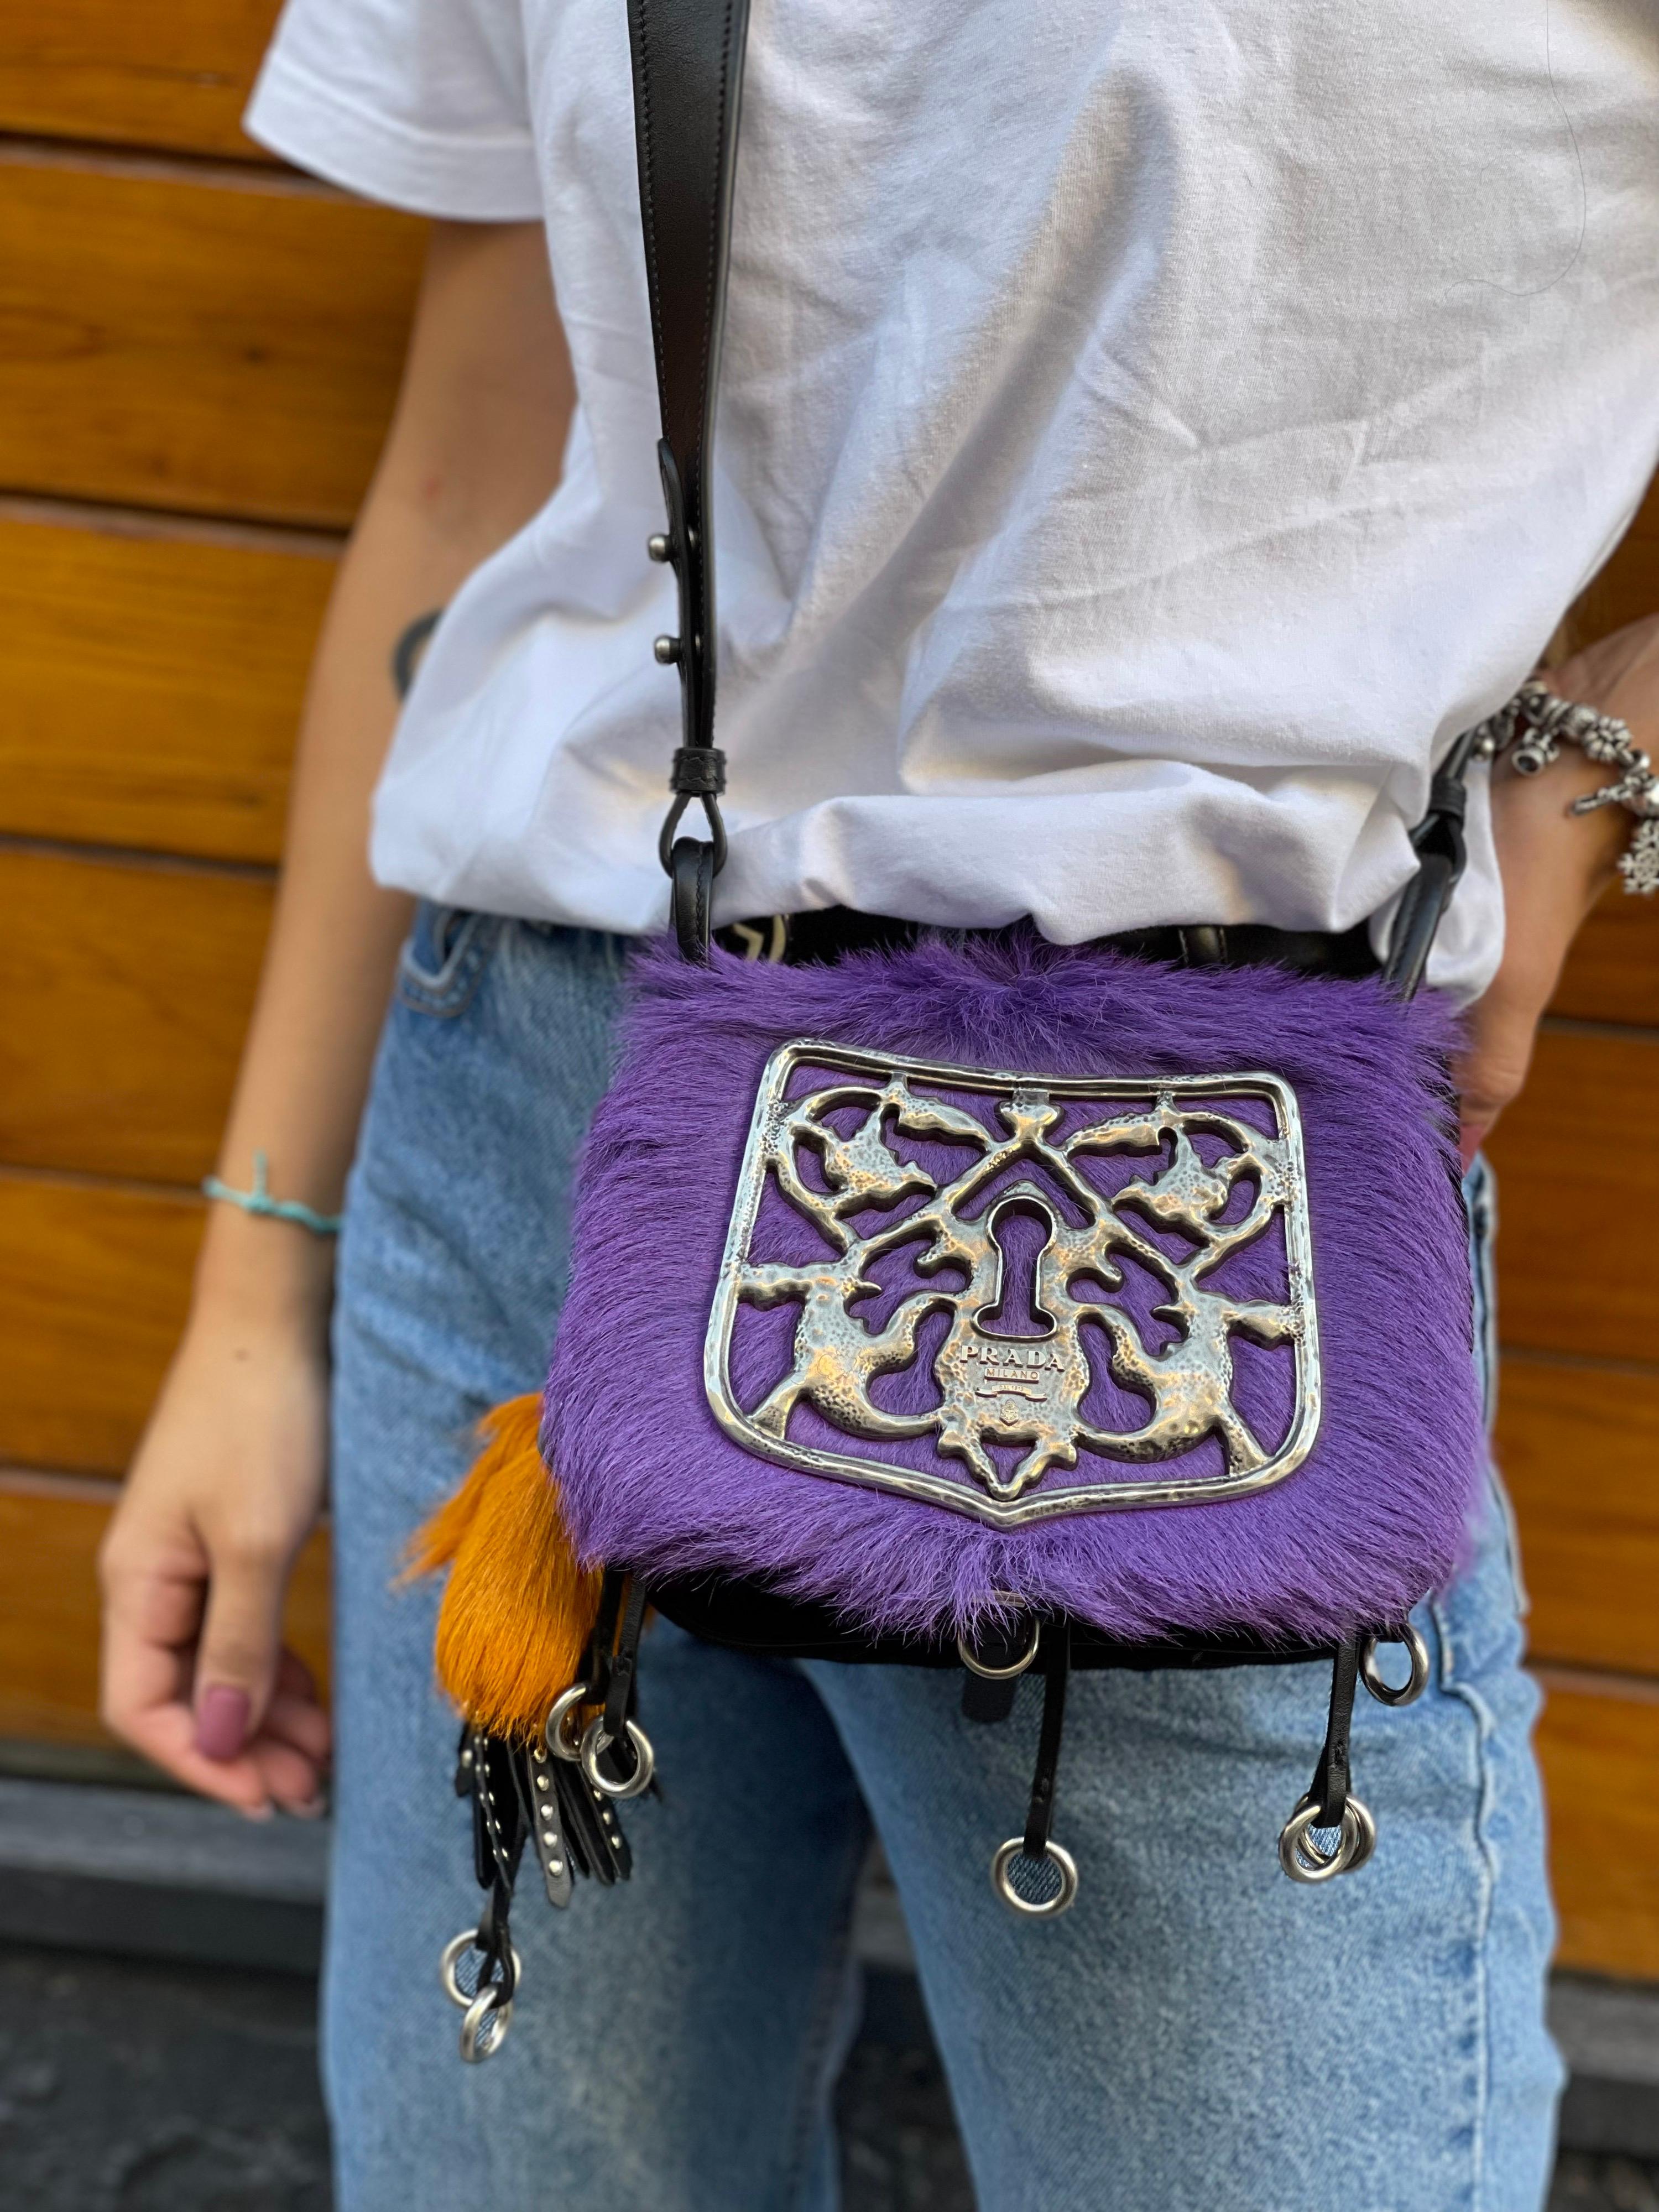 Prada Corsaire with  purple calf hair and black leather, with a touch of silver plated hardware. The bad has a black leather strap with some silver plated hardware. Inside the bag has 3 pockets made with black velvet and black leather. On the side,